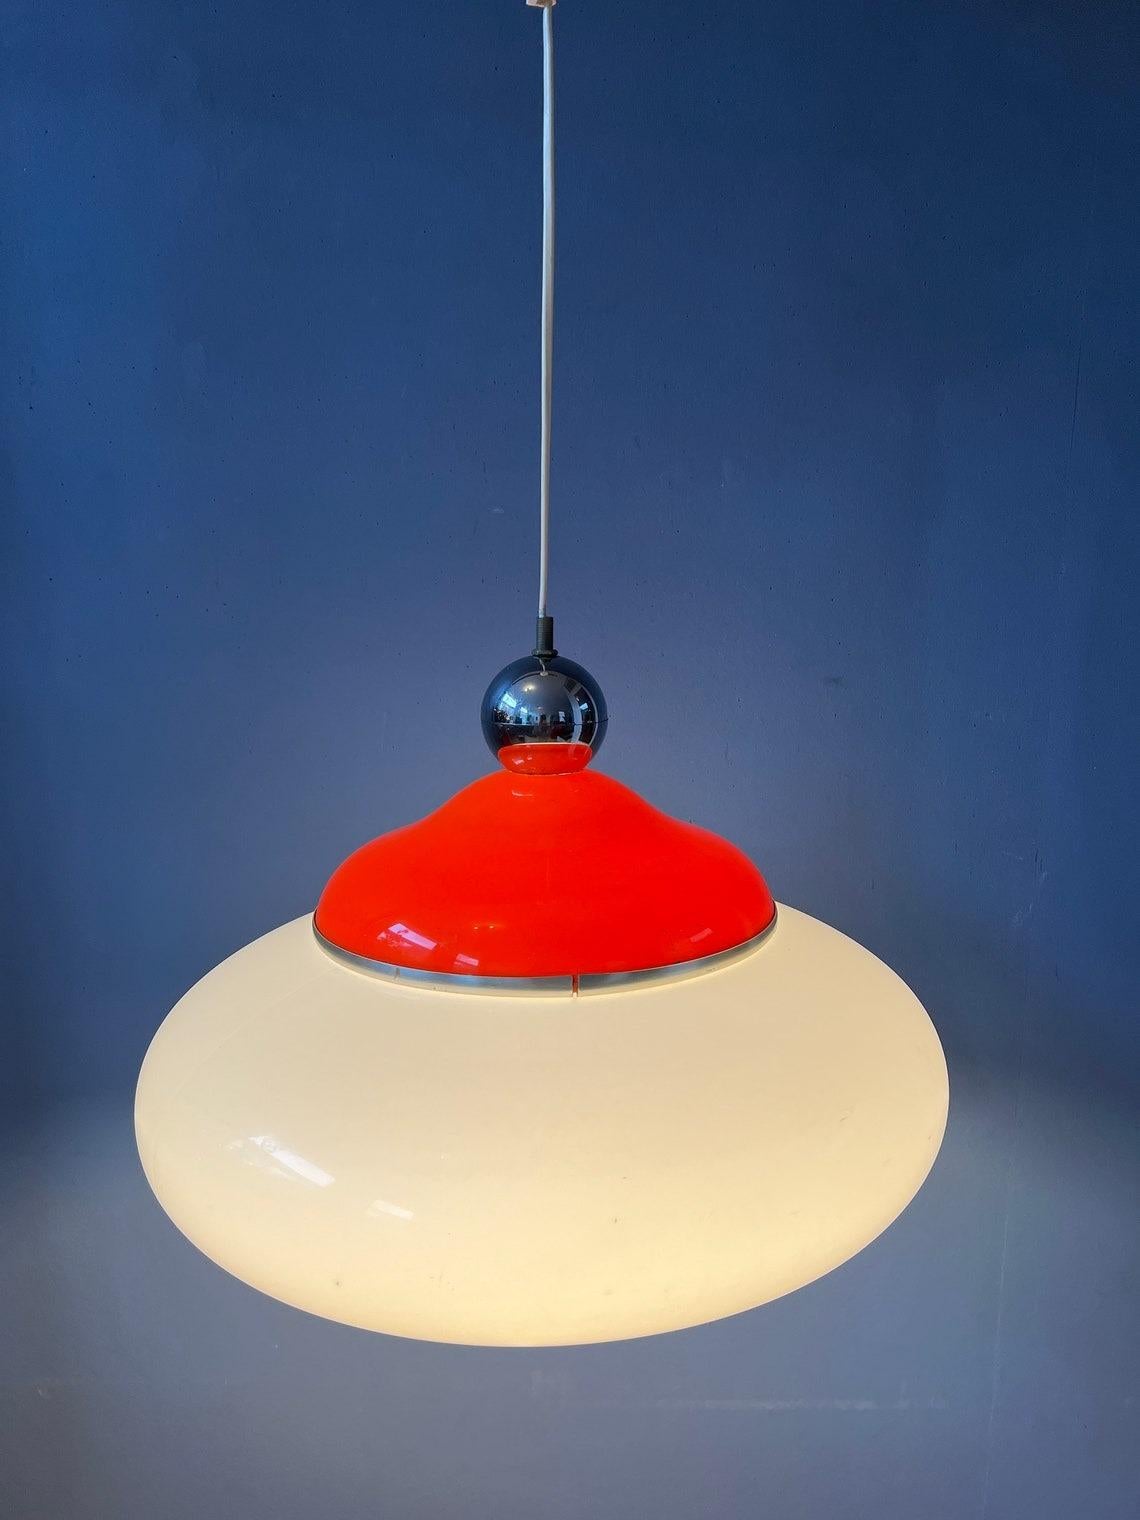 Rare space age pendant lamp with orange and white acrylic glass shade. The lamp produces a warm, cosy light. The lamp requires one E27/26 lightbulb.

Additional information:
Materials: Metal, plastic
Period: 1970s
Dimensions: ø Shade: 34 cm
Height